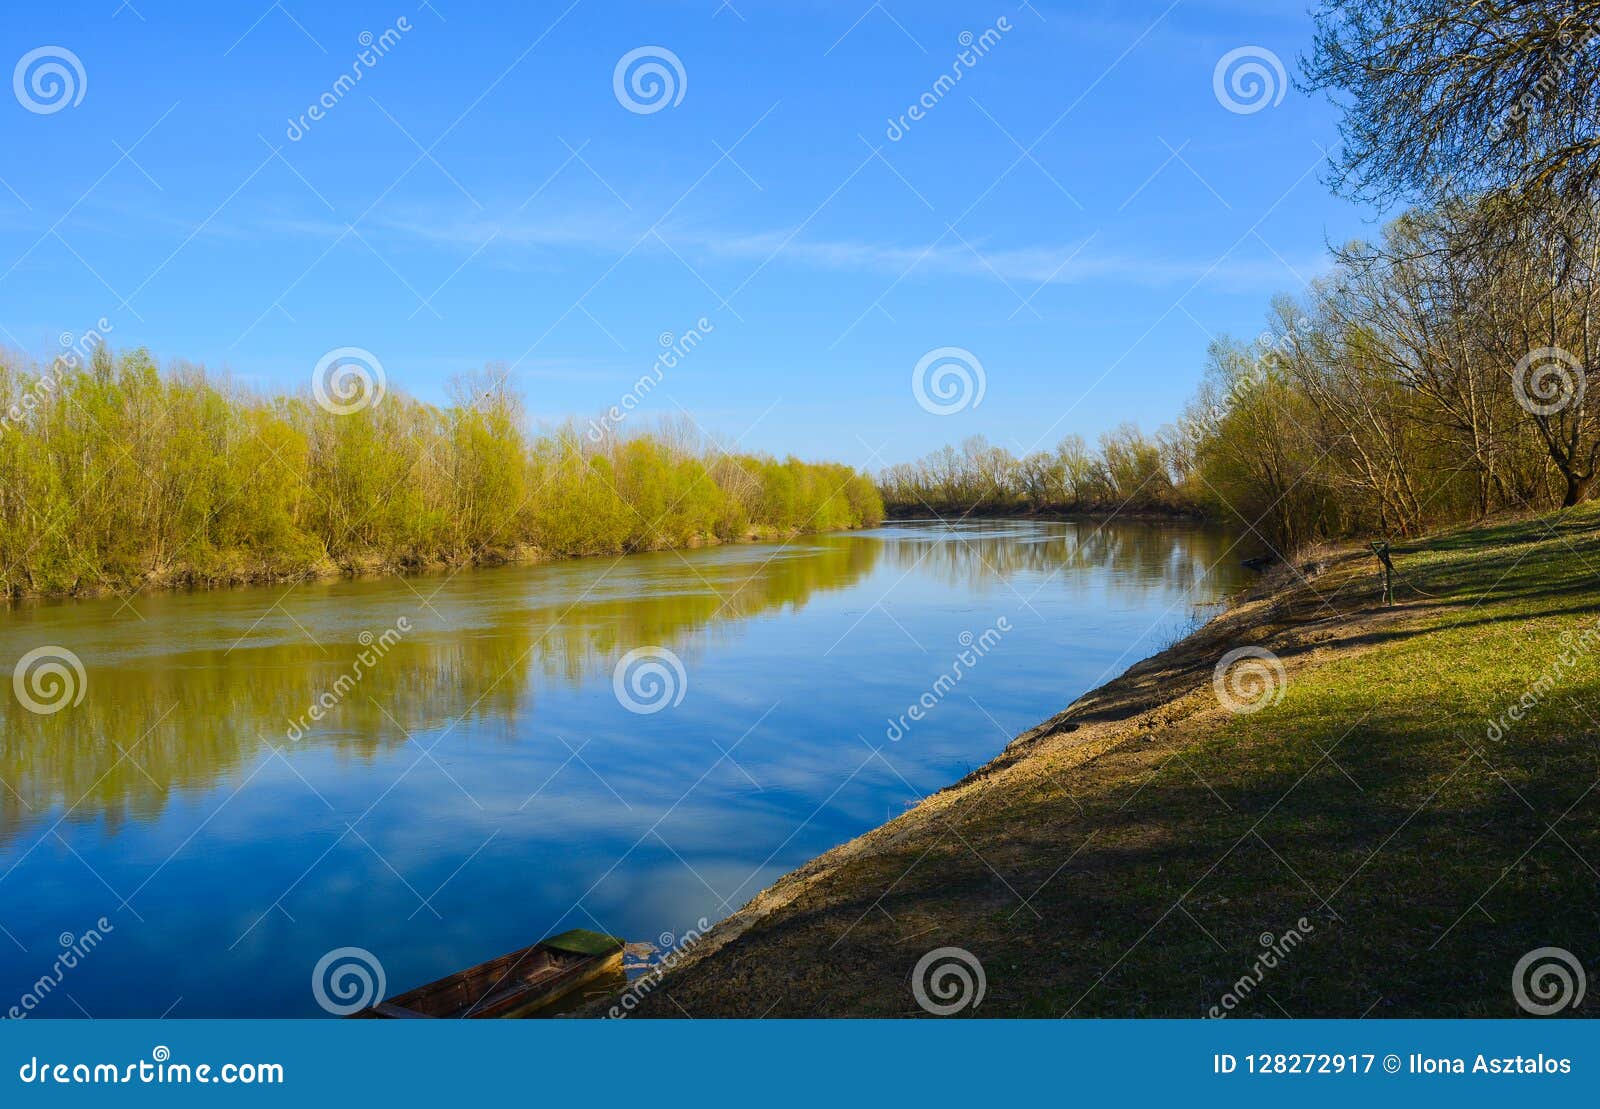 Tisza river in Hungary stock image. Image of woods, grass - 128272917